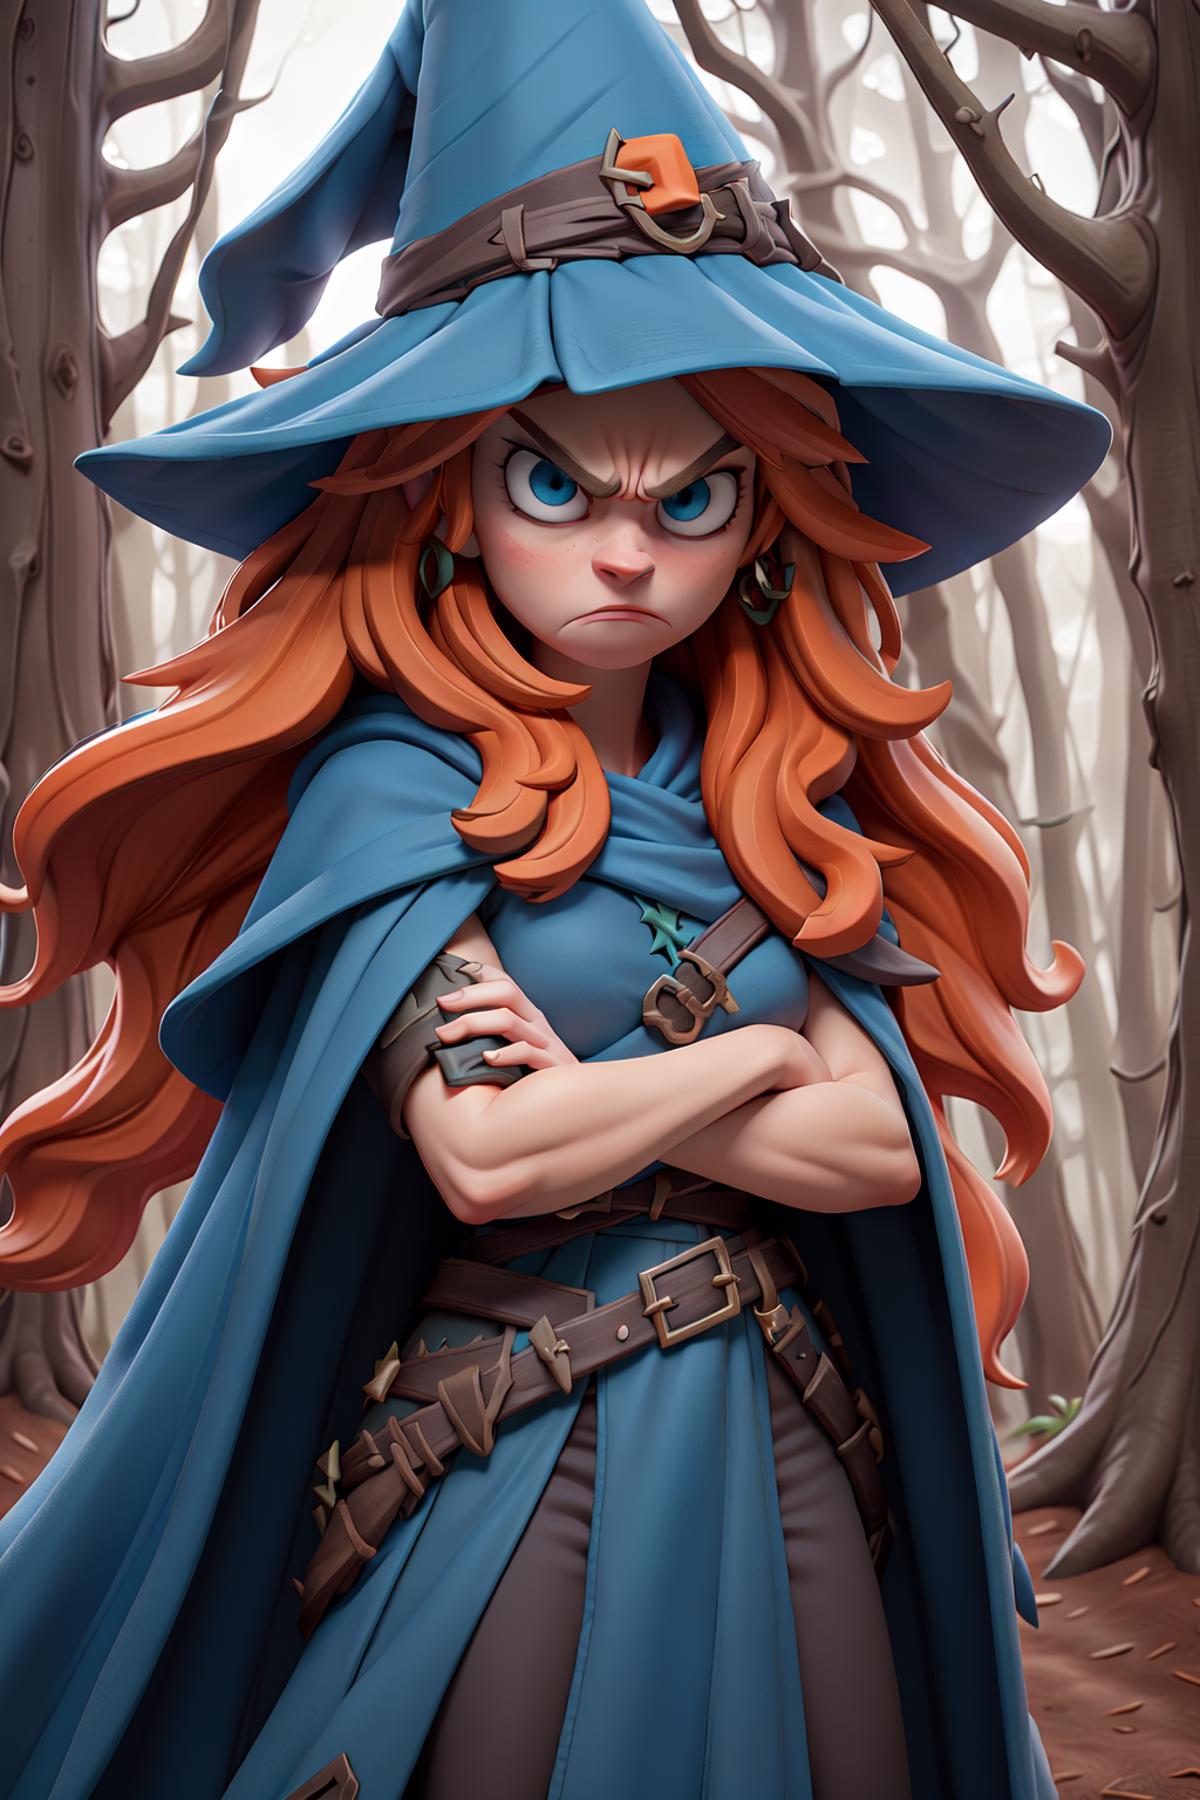 Angry Witch in Blue Robe and Wig, with a Frowning Expression